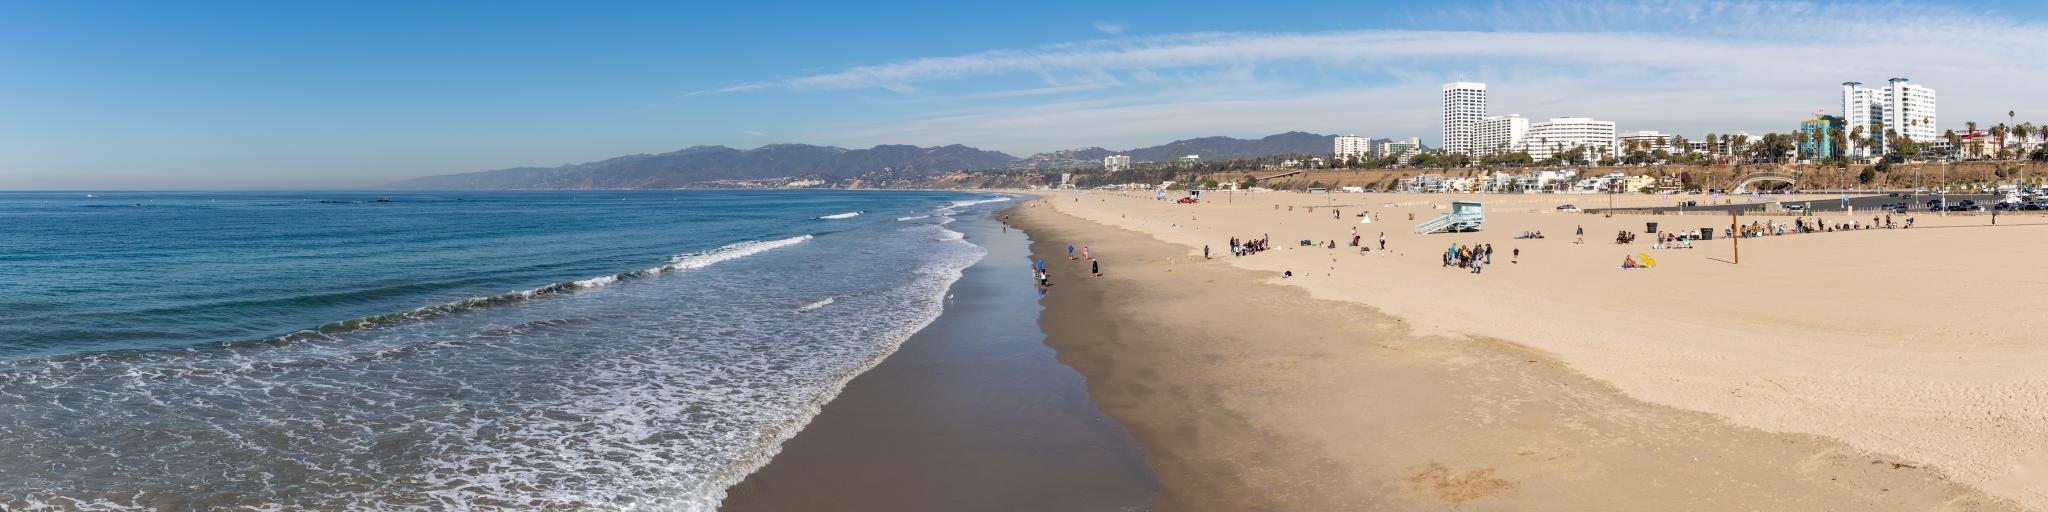 A panorama picture of the Santa Monica State Beach, with waves lapping against sandy shore